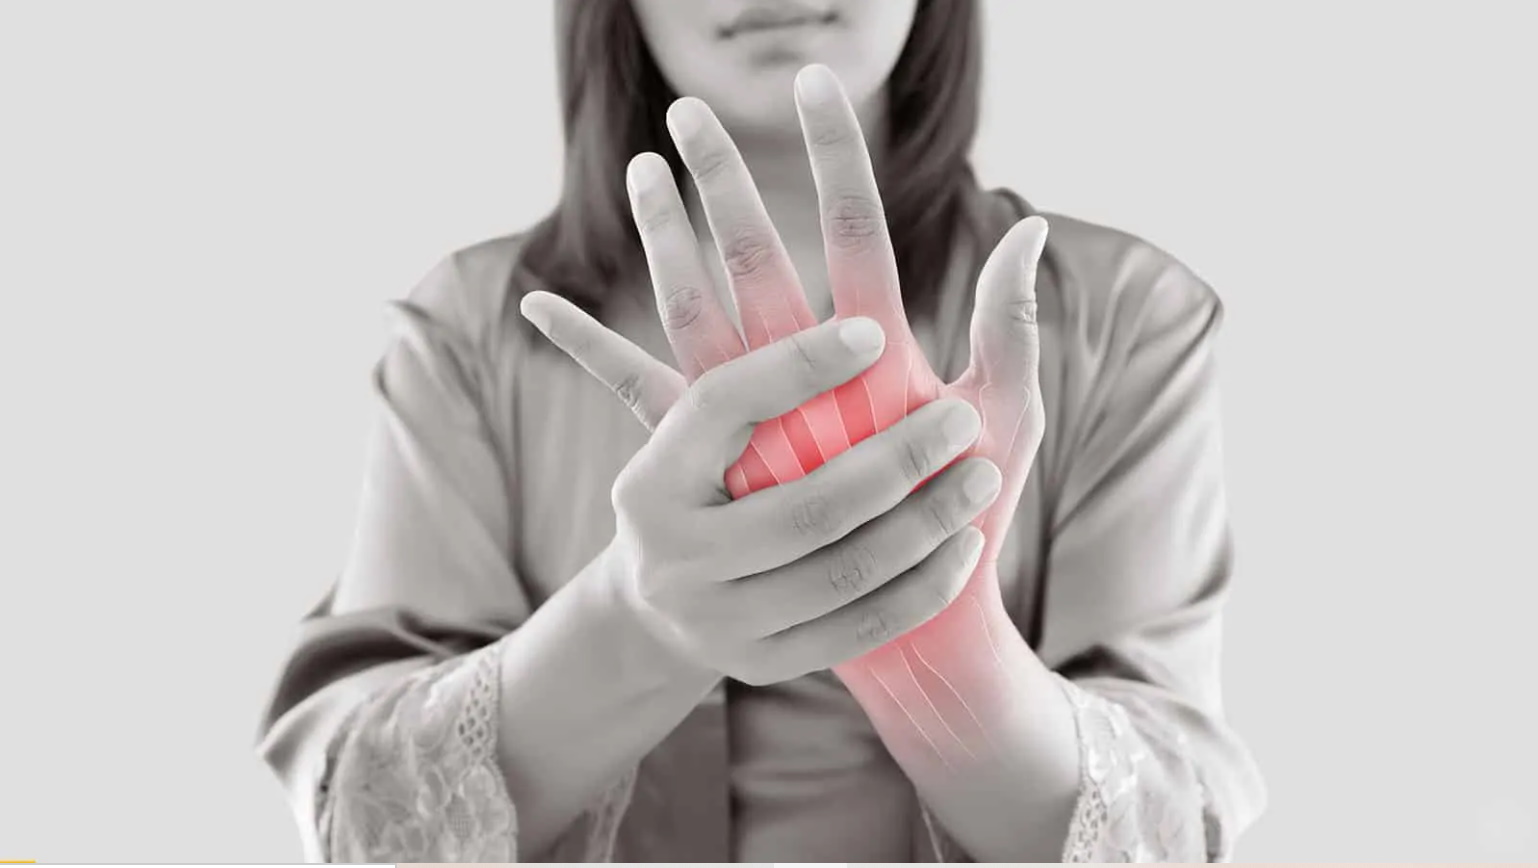 My Fingers Ache and My Hands Get Numb When I Sleep…Arthritis or Carpal Tunnel?